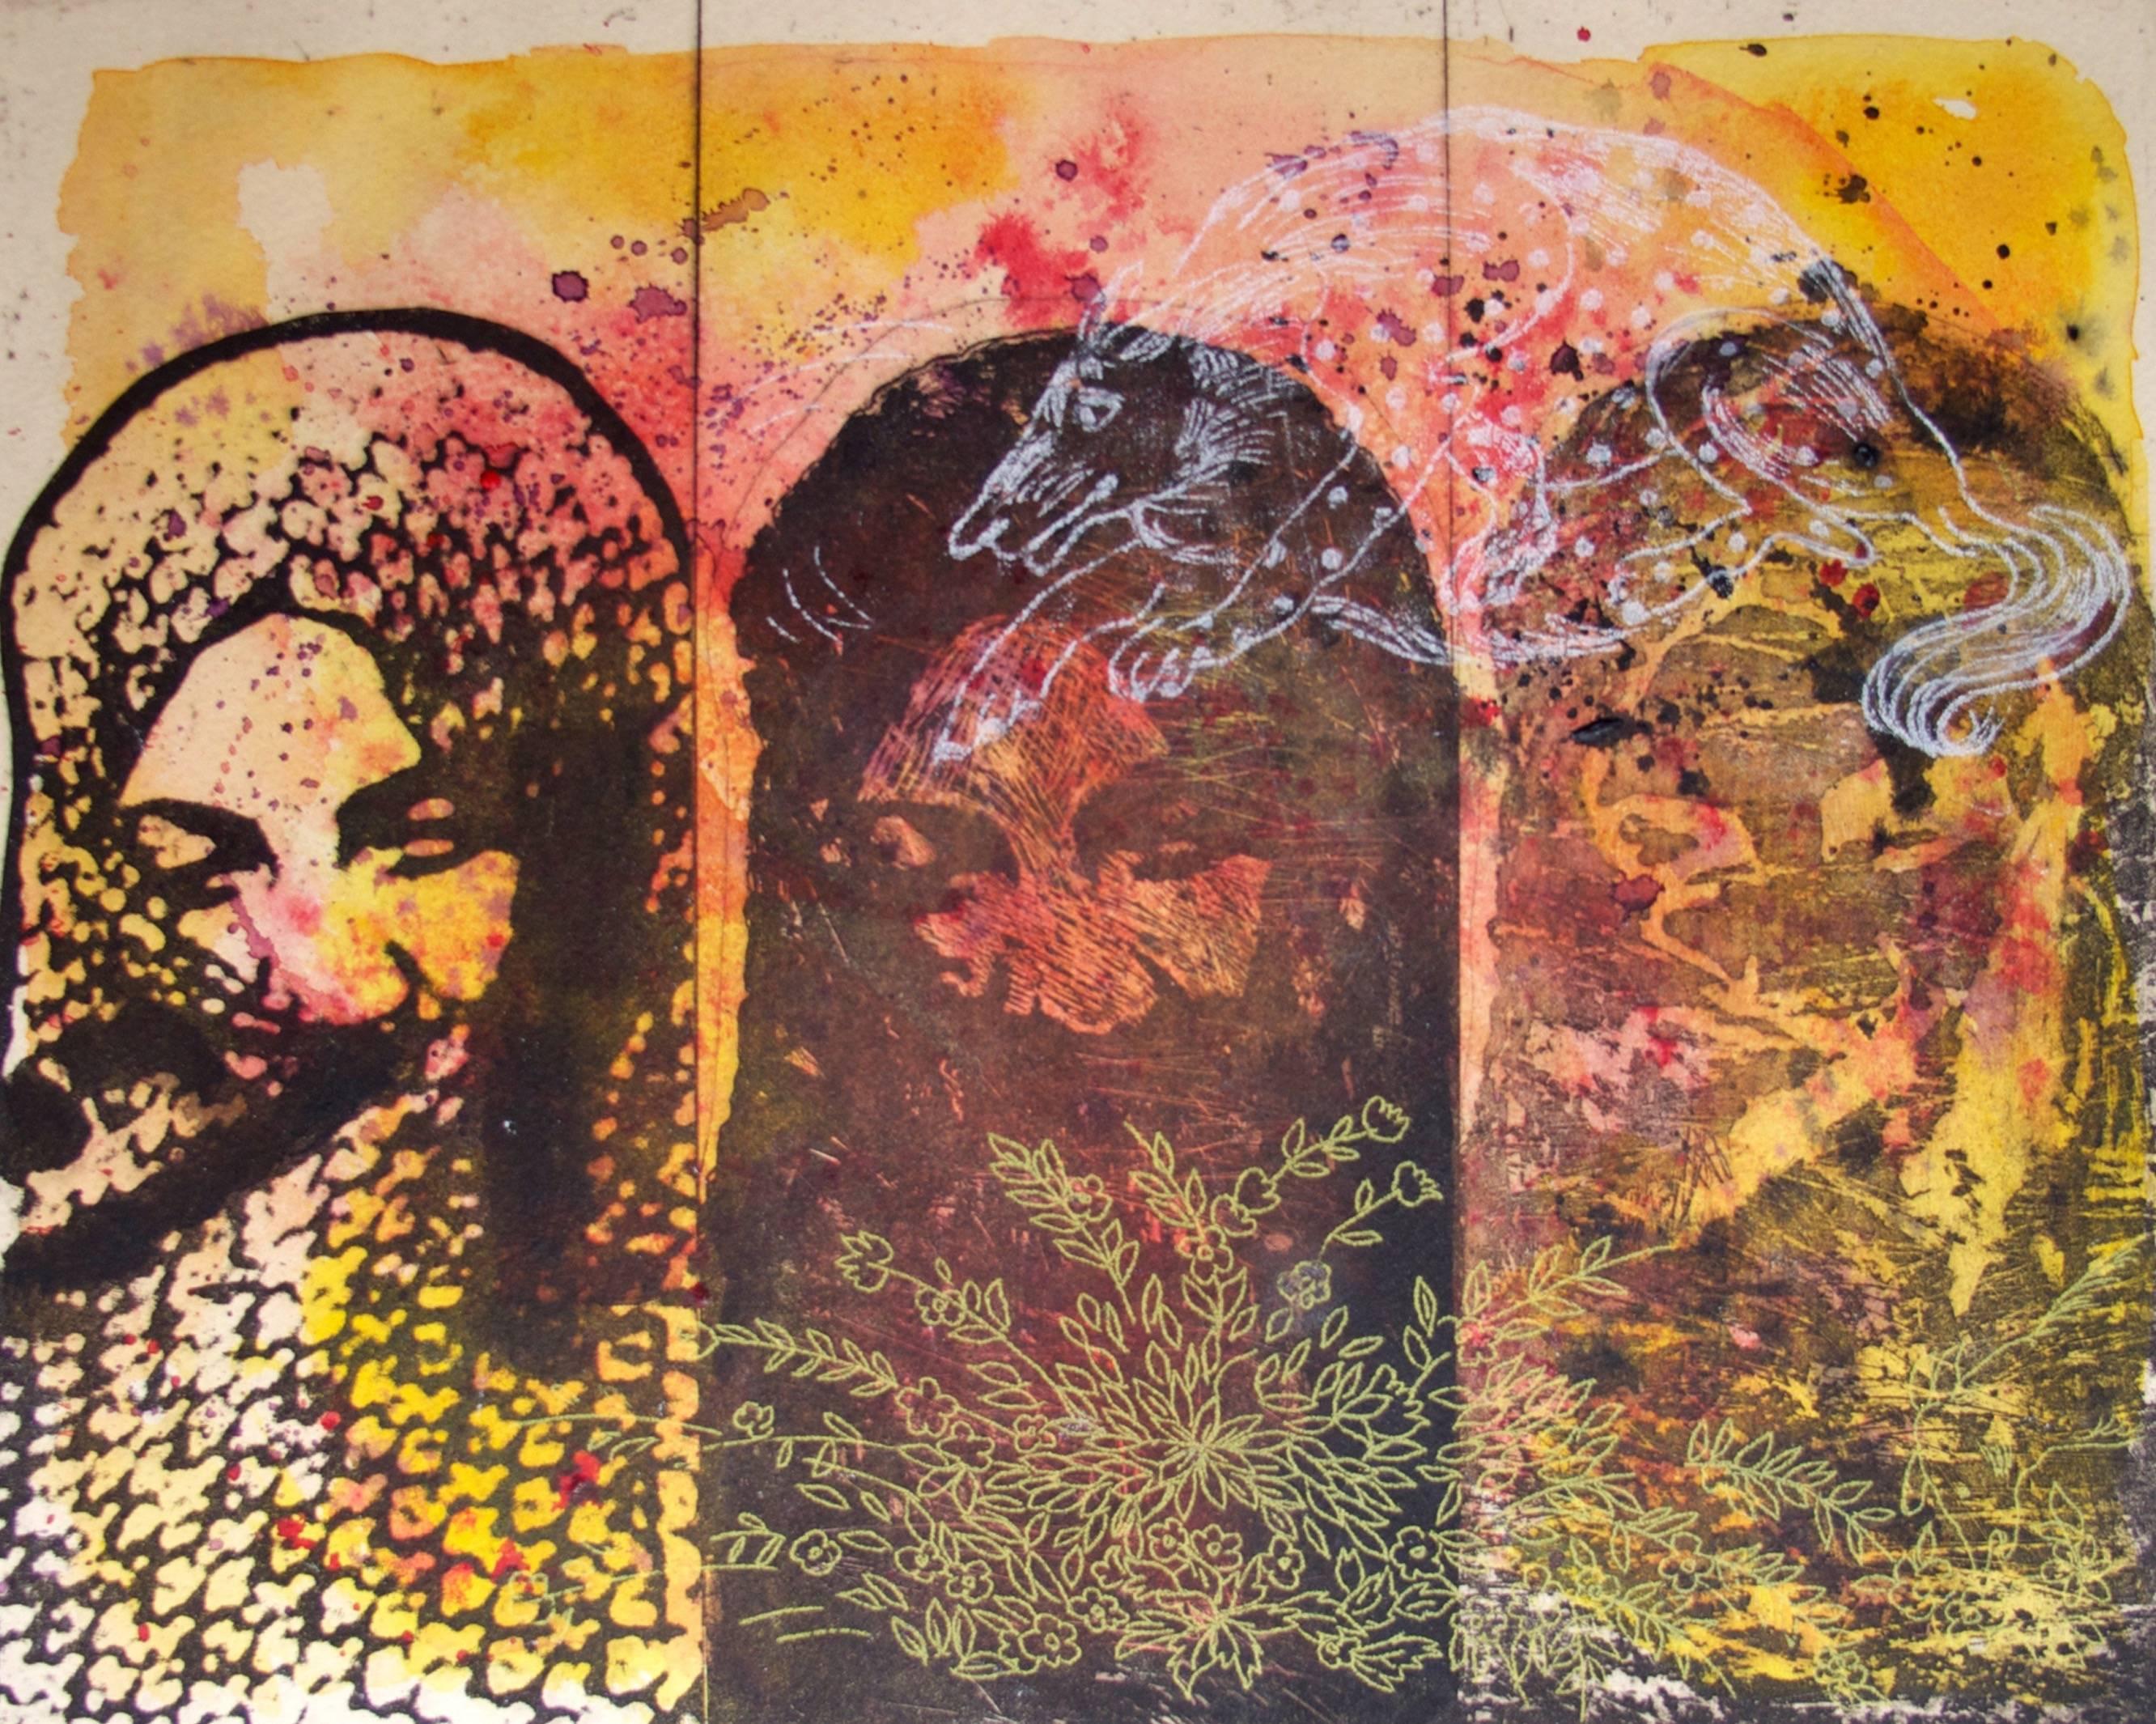 Three Faces with White Animal - Mixed Media Art by Nahid Hagigat